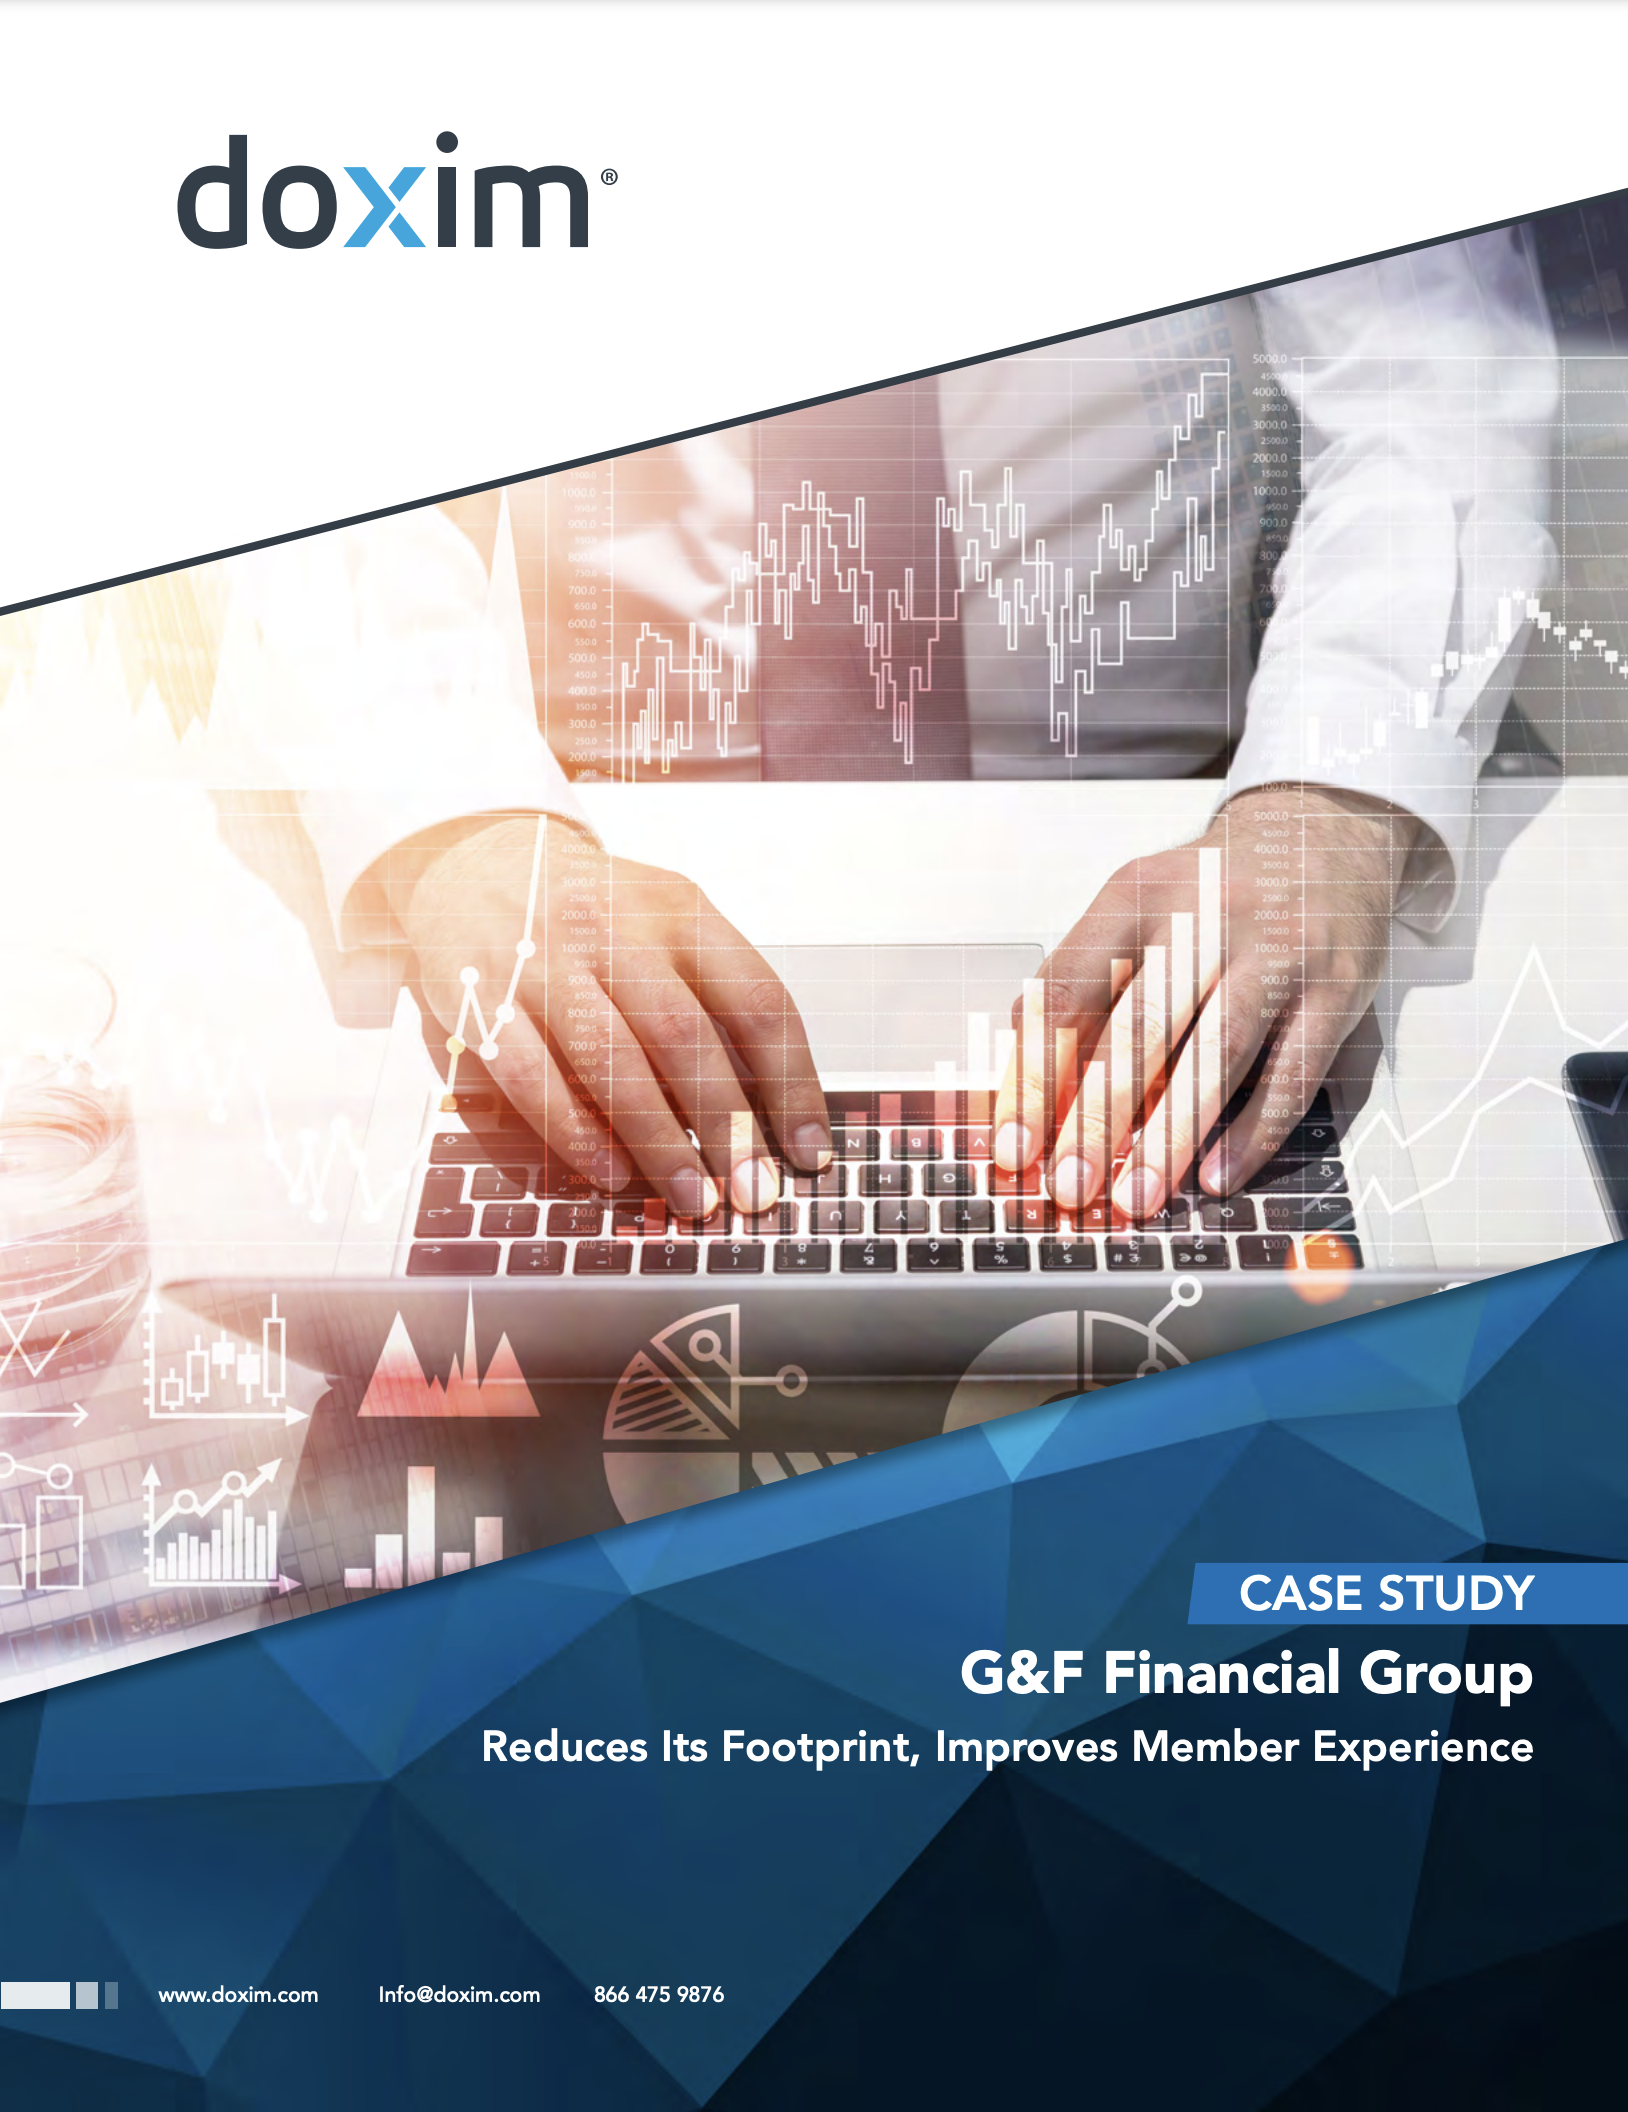 Case study: G&F Financial Group Reduces Its Footprint, Improves Member Experience